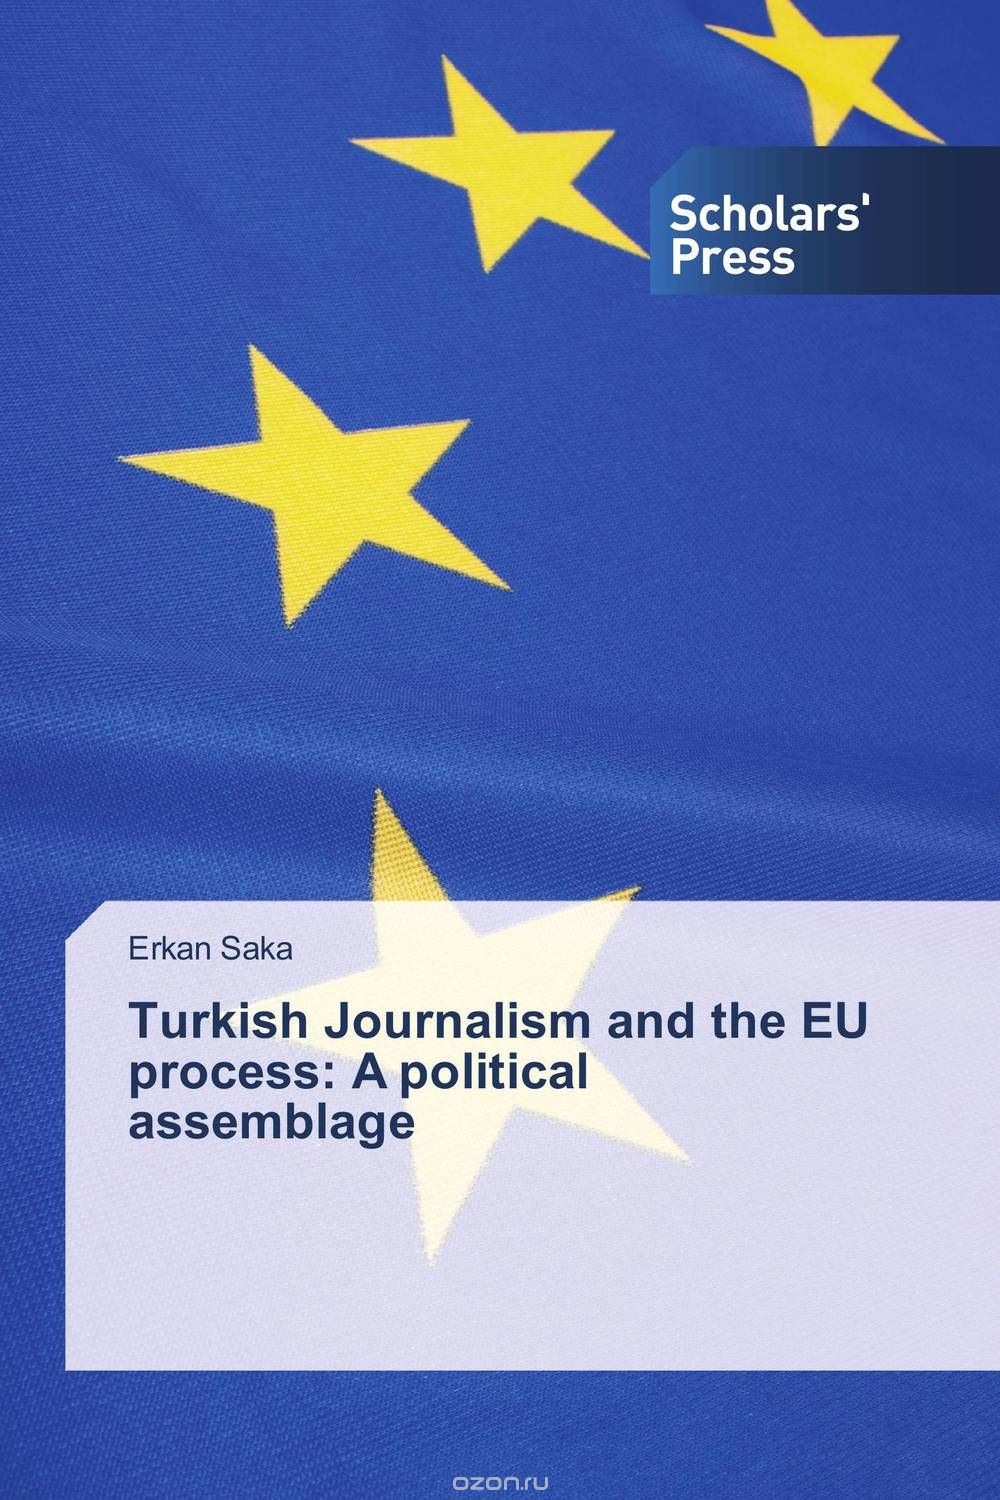 Turkish Journalism and the EU process: A political assemblage